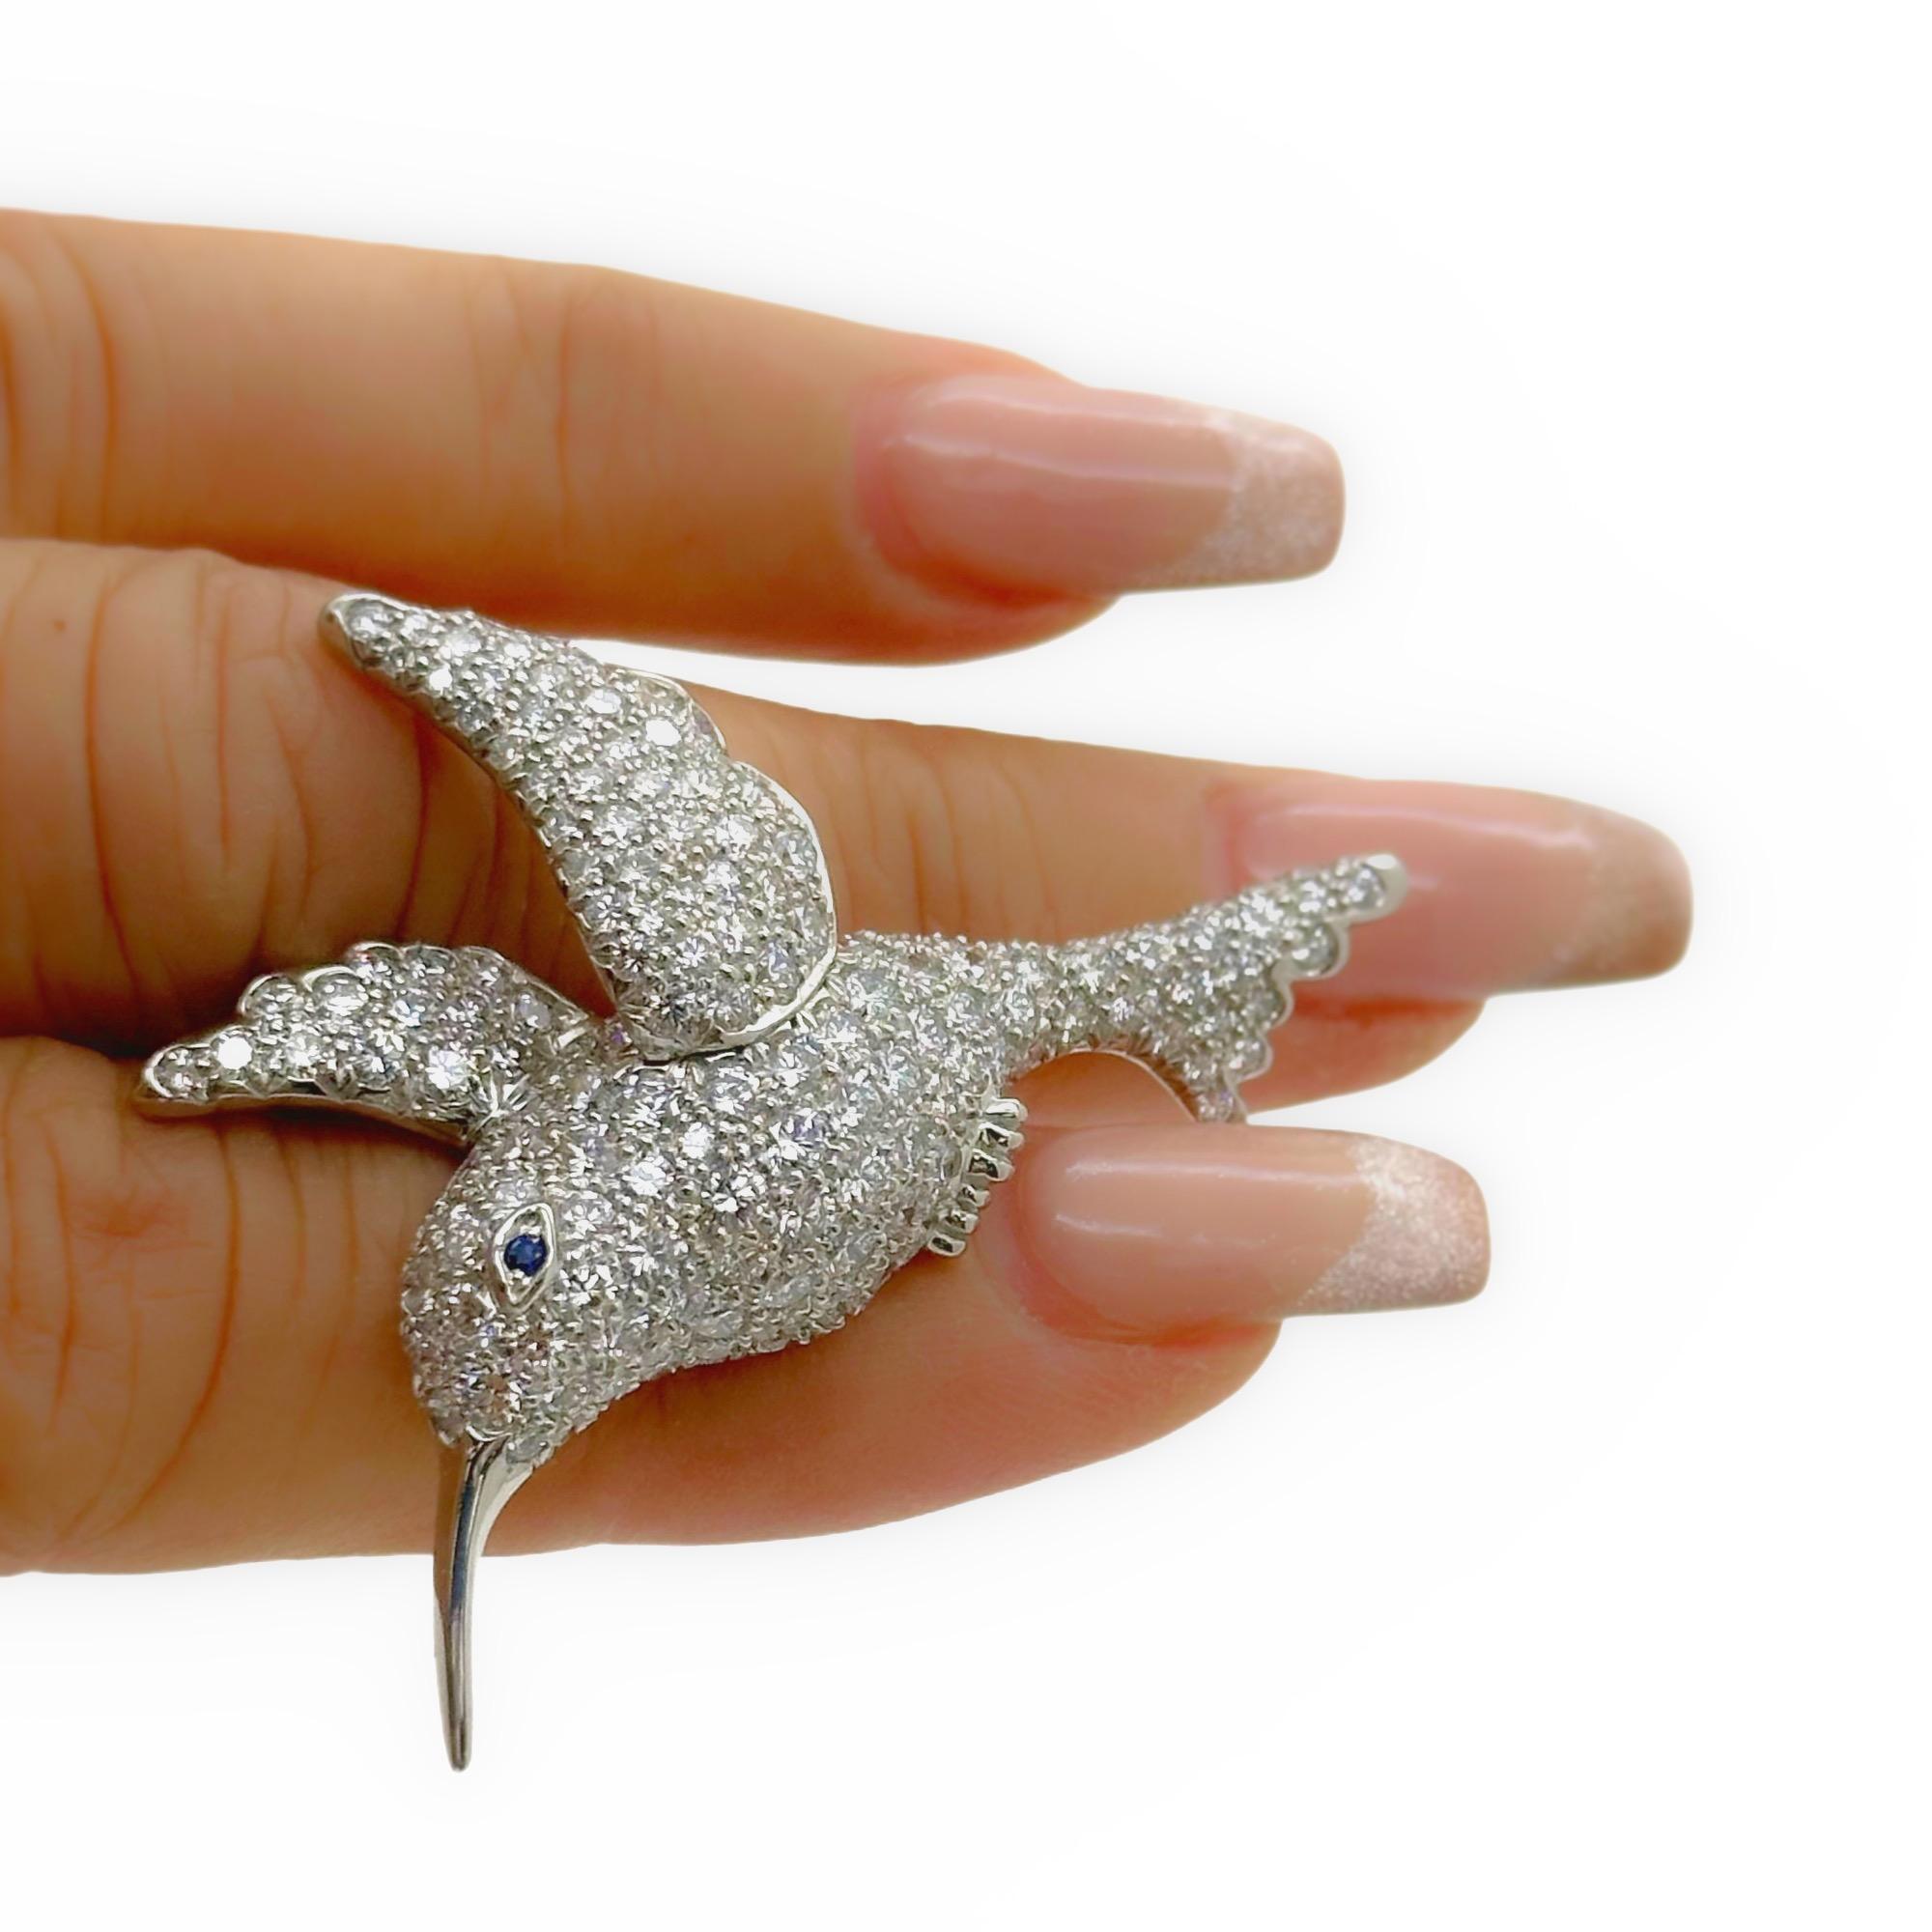 Tiffany & Co. Hummingbird Diamond Brooch Pin in Platinum In Excellent Condition For Sale In San Diego, CA